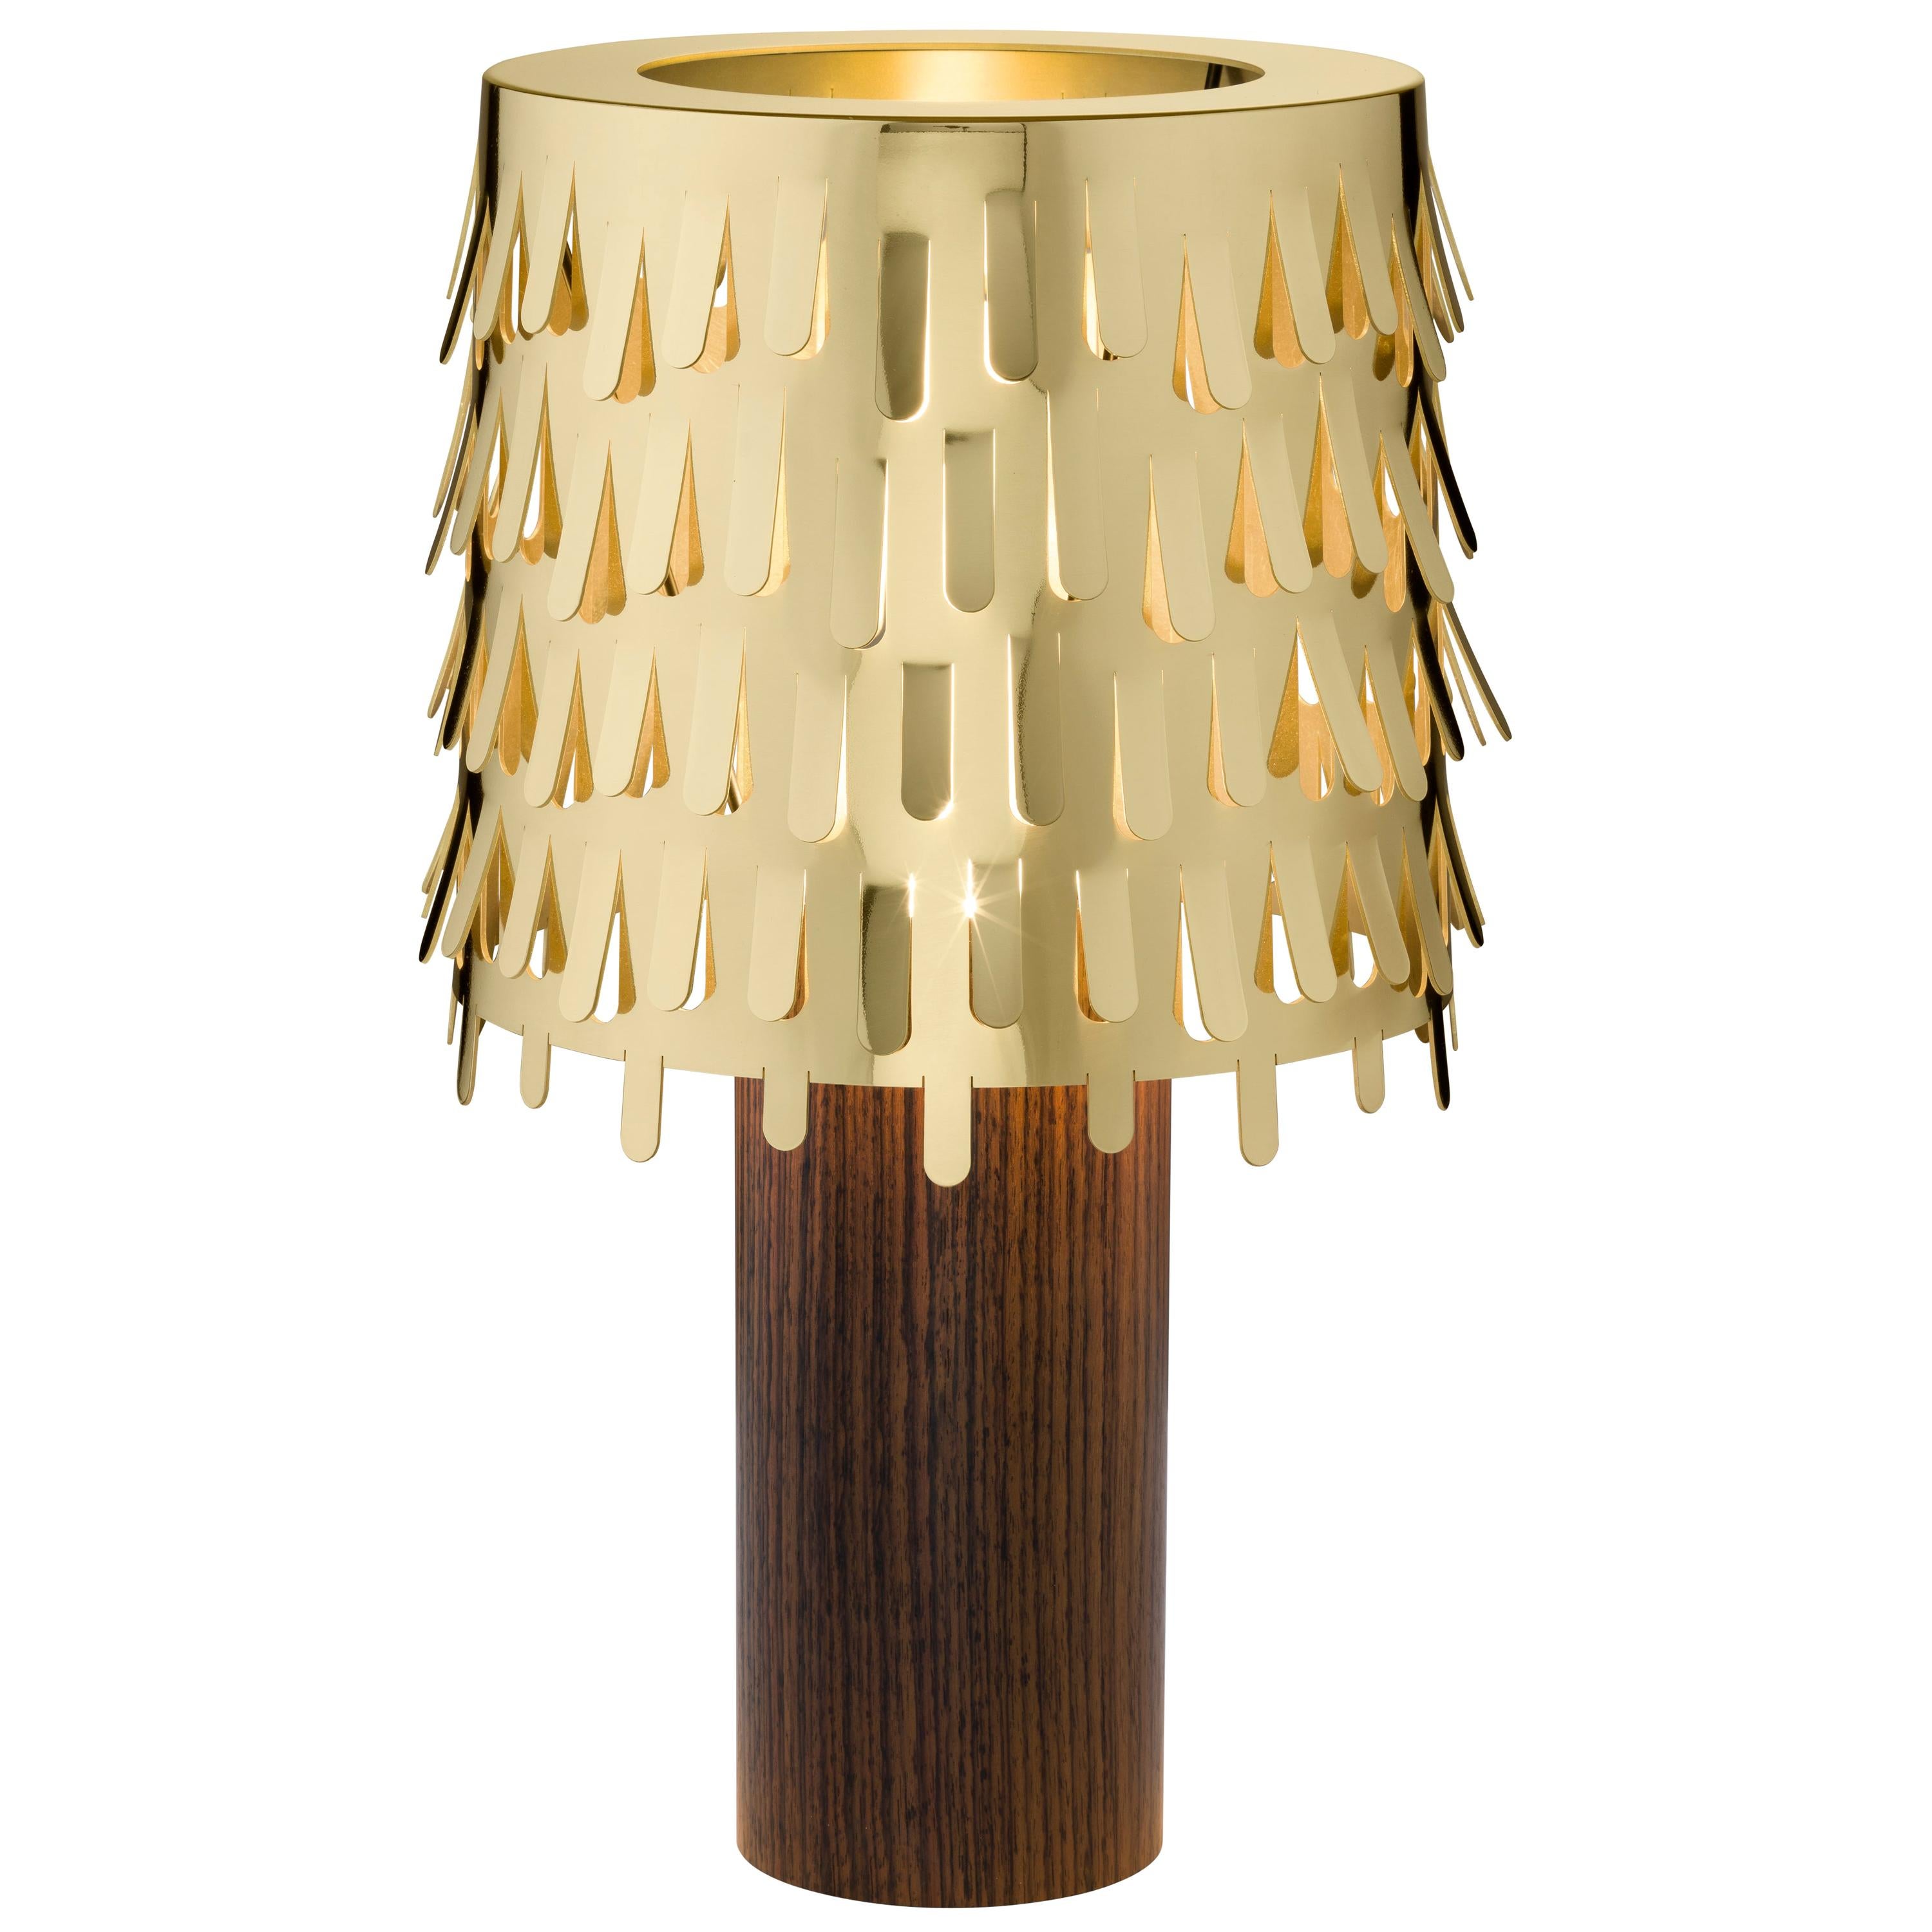 Ghidini 1961 Jackfruit Table Lamp in Brass and Wood by Campana Brothers For Sale